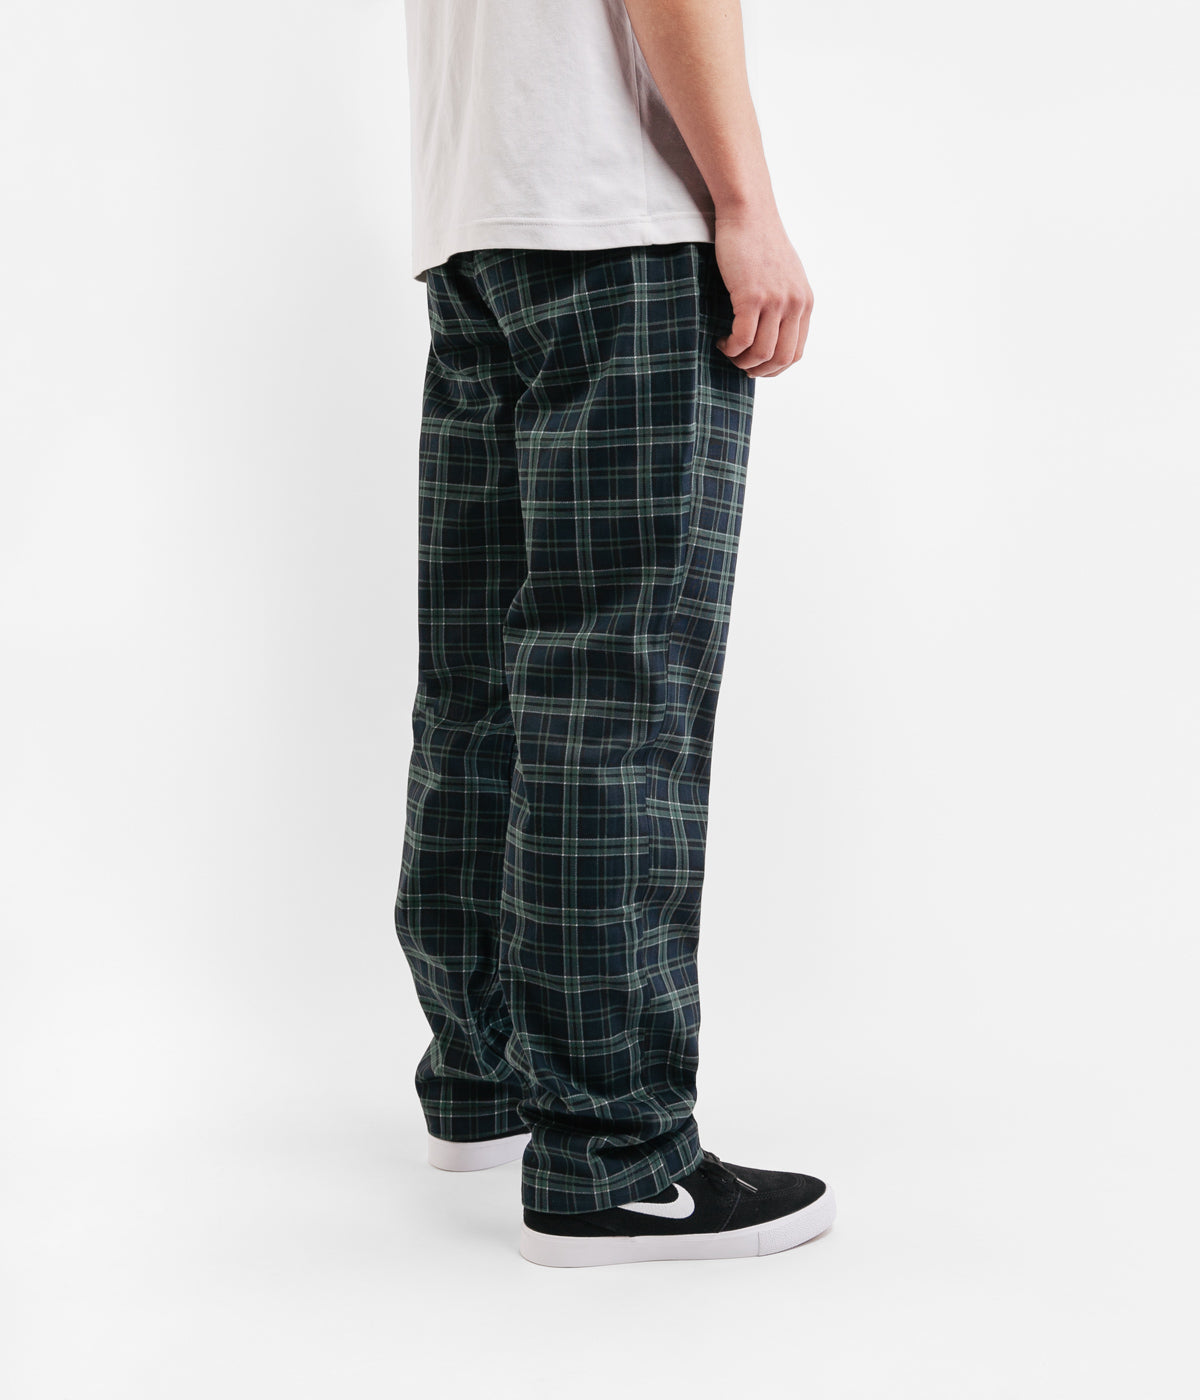 levis checkered pants